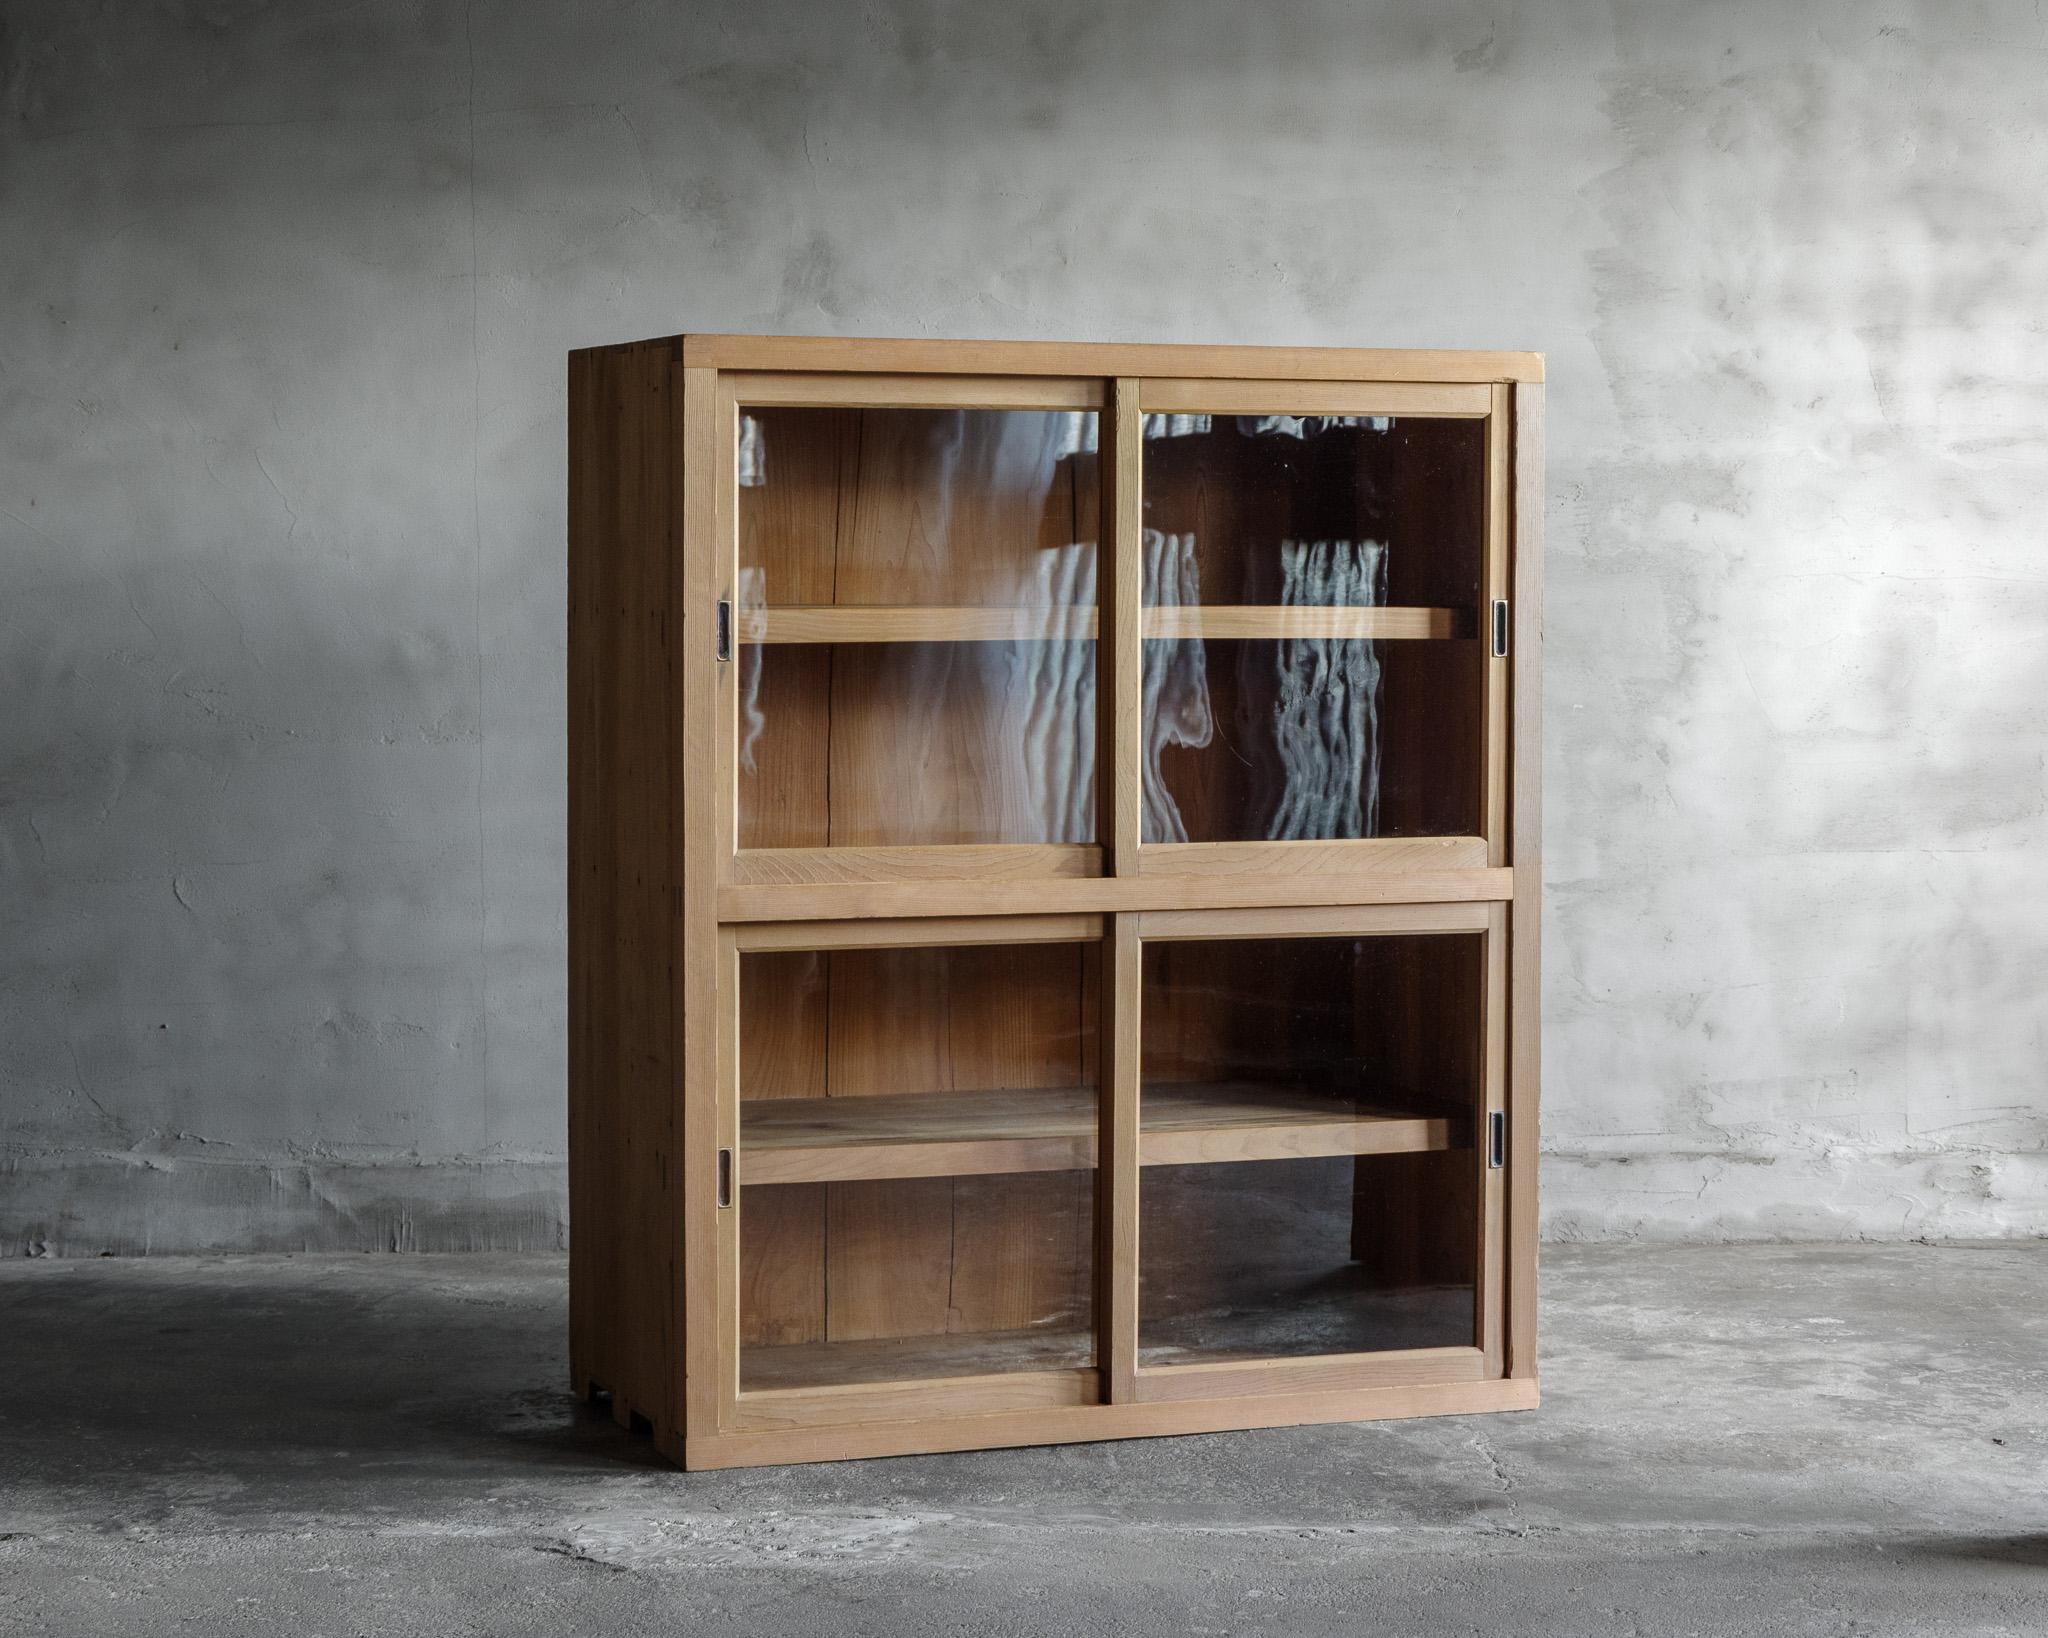 This antique cabinet, crafted during the Taisho to early Showa period in Japan.
is a testament to beauty in simplicity.
Its design is free of any unnecessary elements, embodying the essence of 'Wabi-sabi' - the aesthetic of finding beauty in